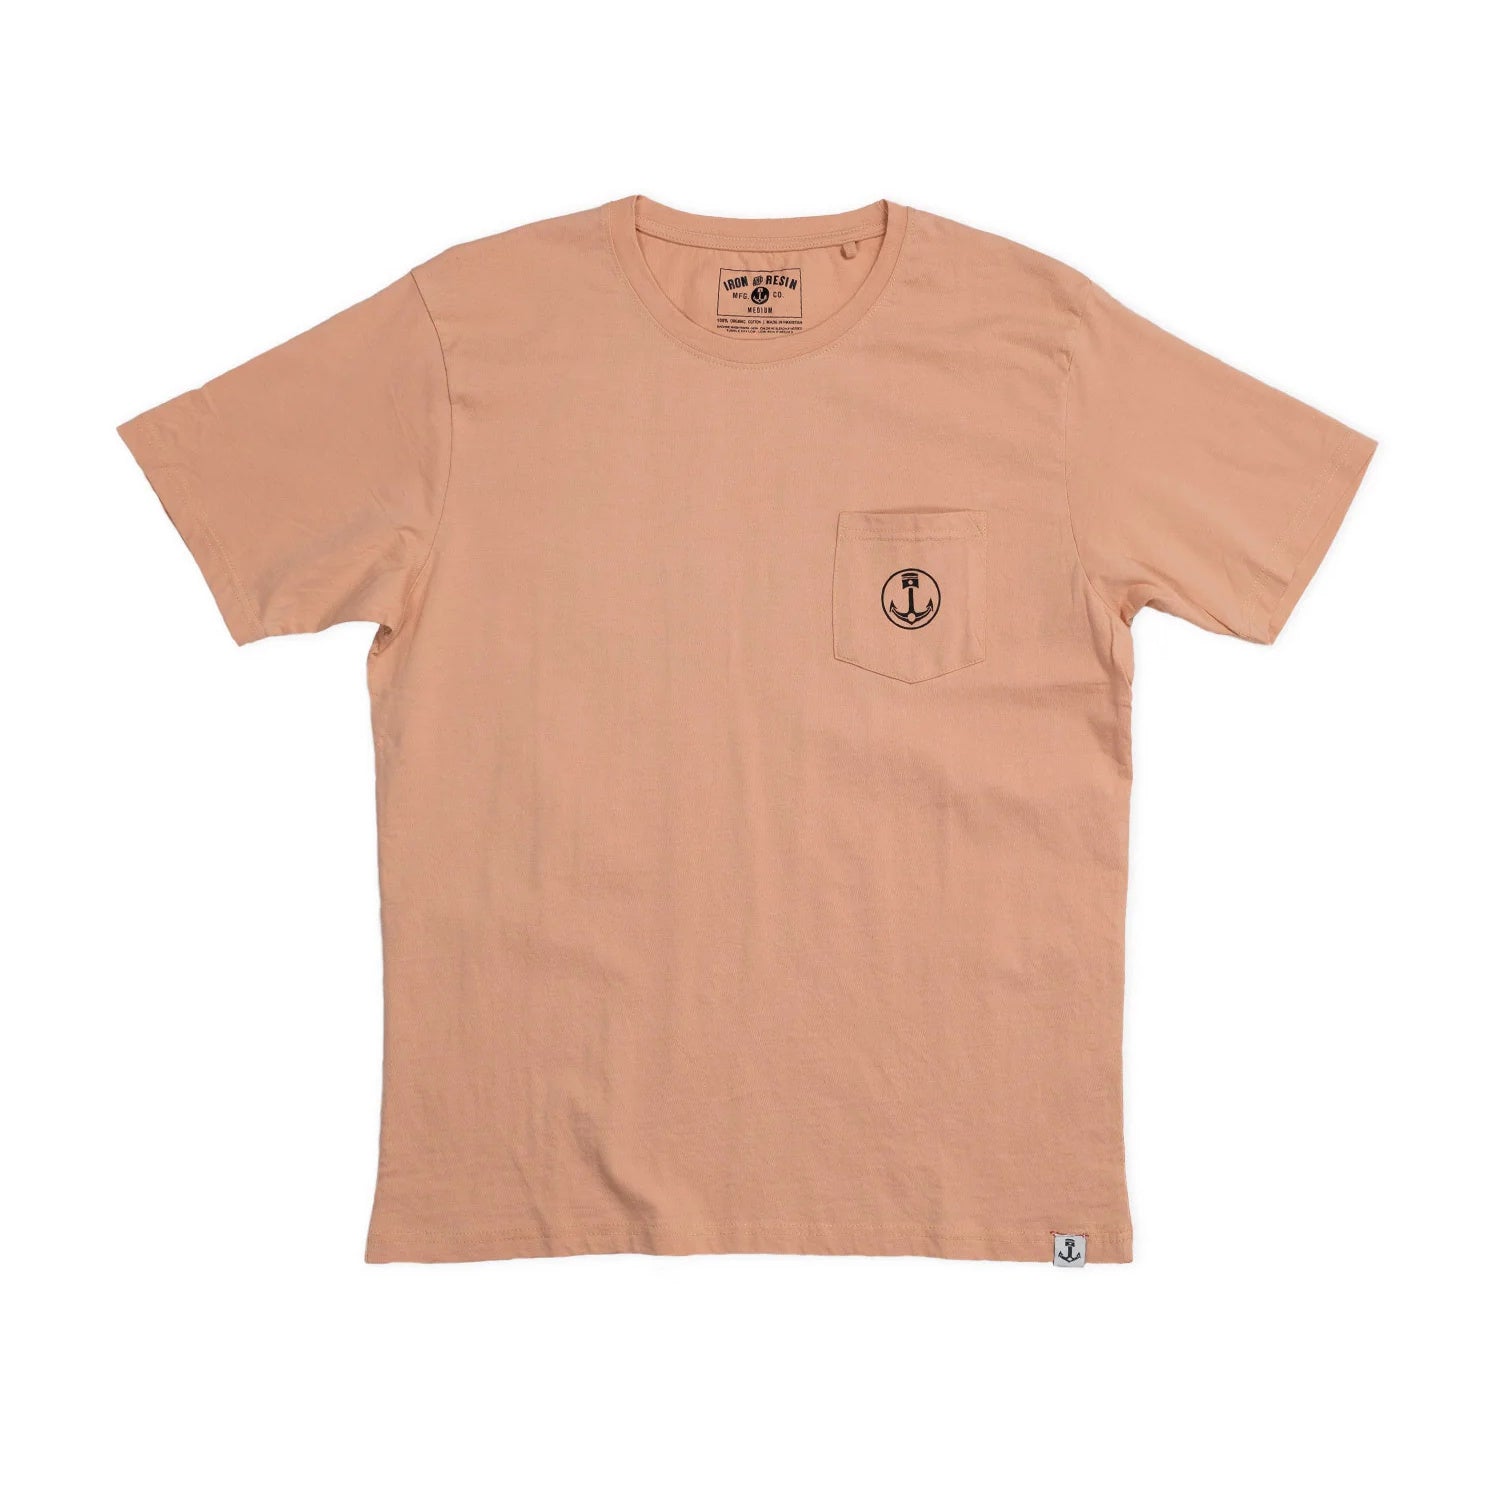 Iron & Resin Surf Ink Pocket Tee - Pink front